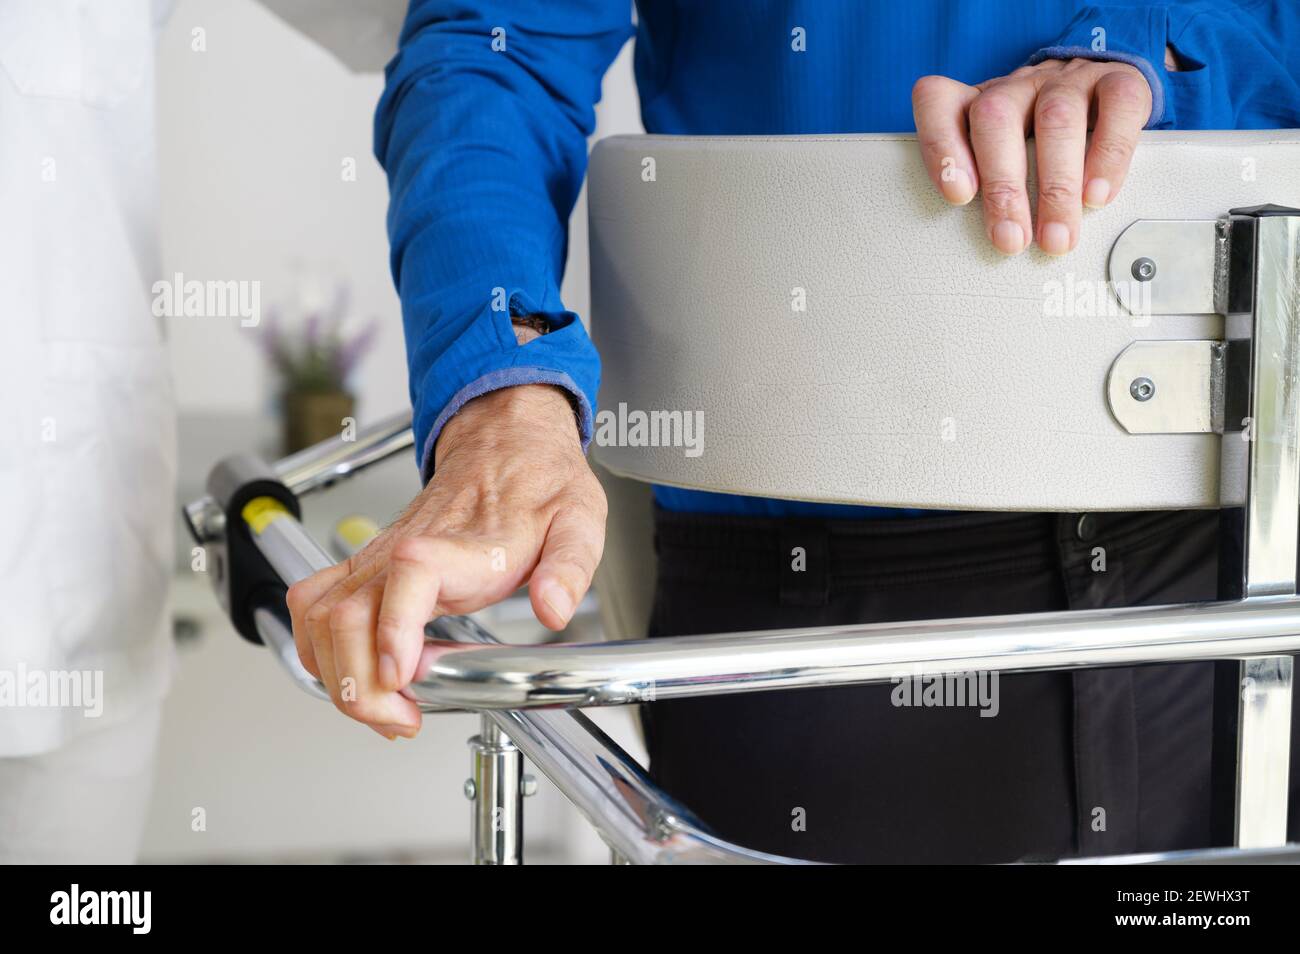 Physiotherapy equipment - Stock Image - C015/5208 - Science Photo